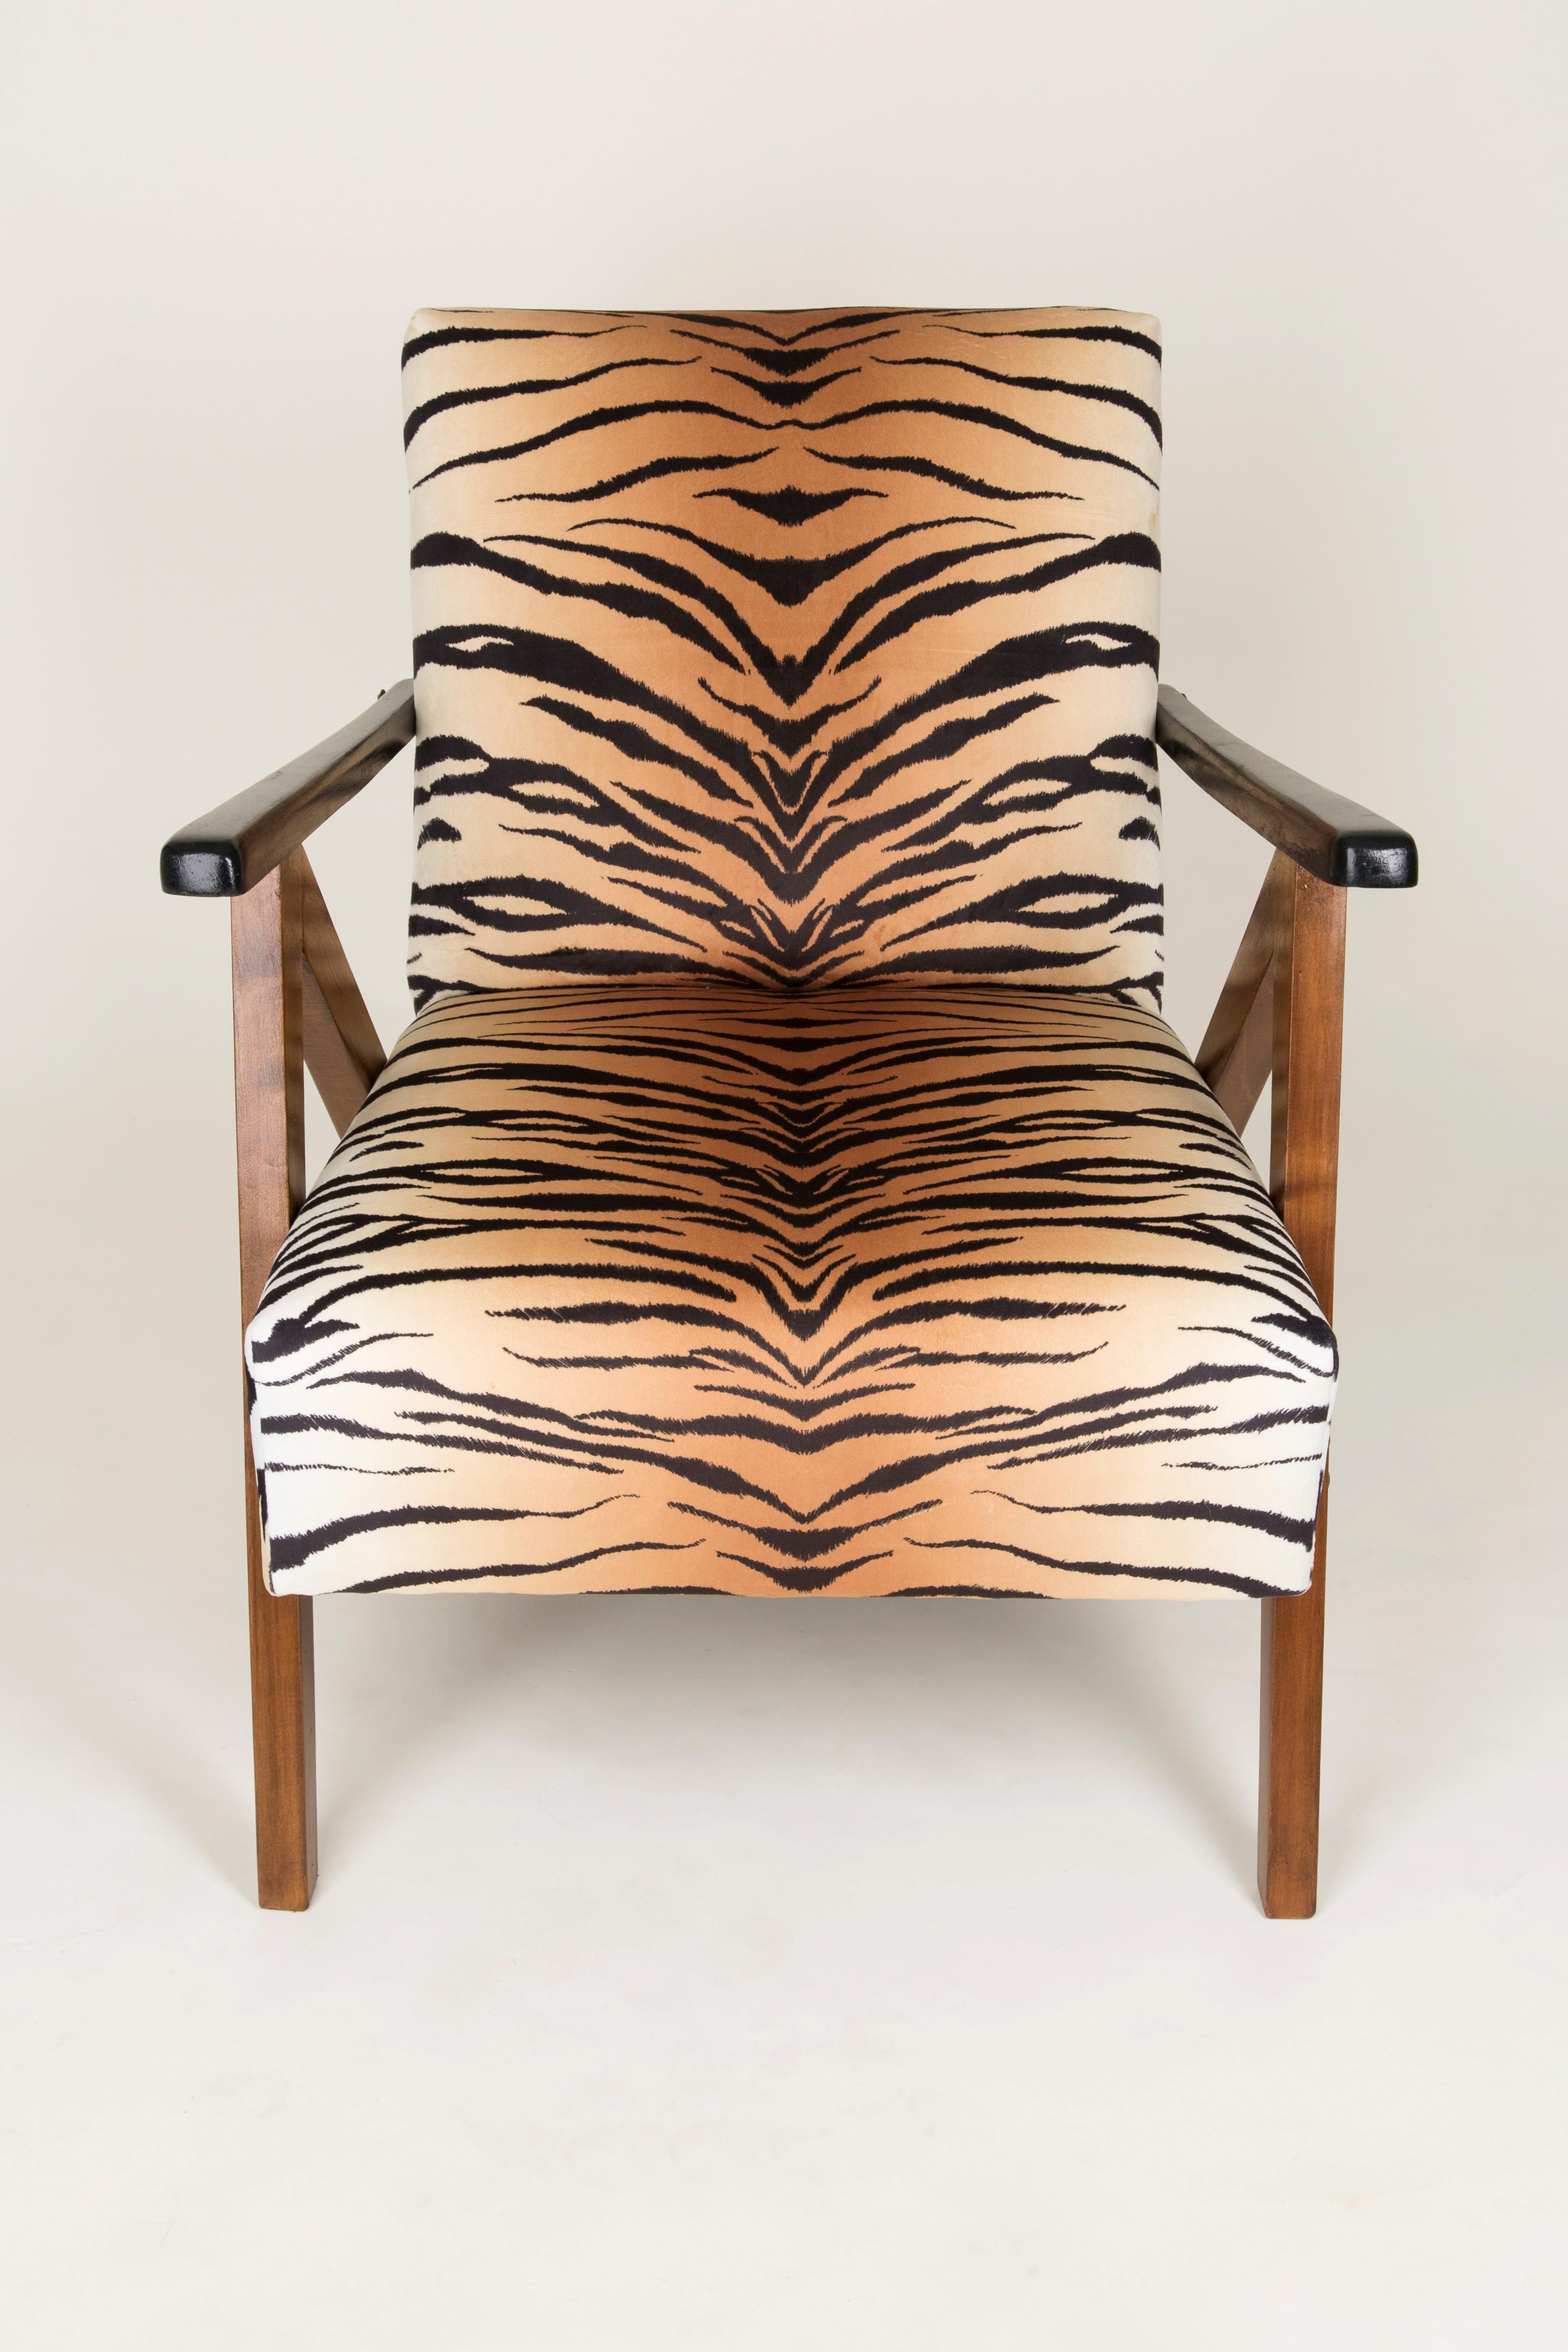 Hand-Crafted Mid-Century Modern Tiger Print Armchair and Stool, 1960s, Germany For Sale